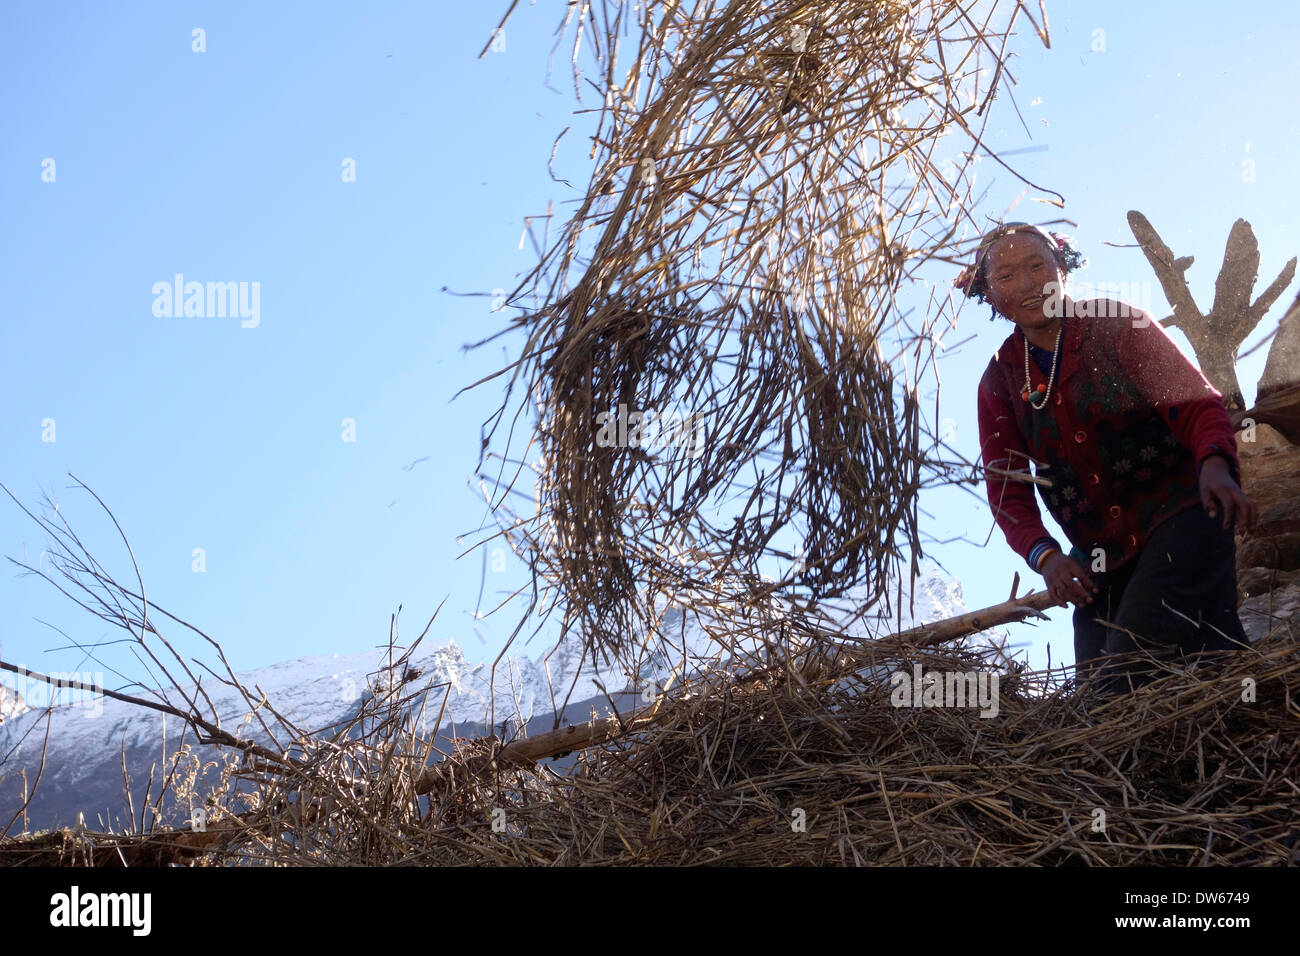 Tibetan woman throwing straw off a hillside to be collected for livestock feed, Manaslu region, Nepal. Stock Photo